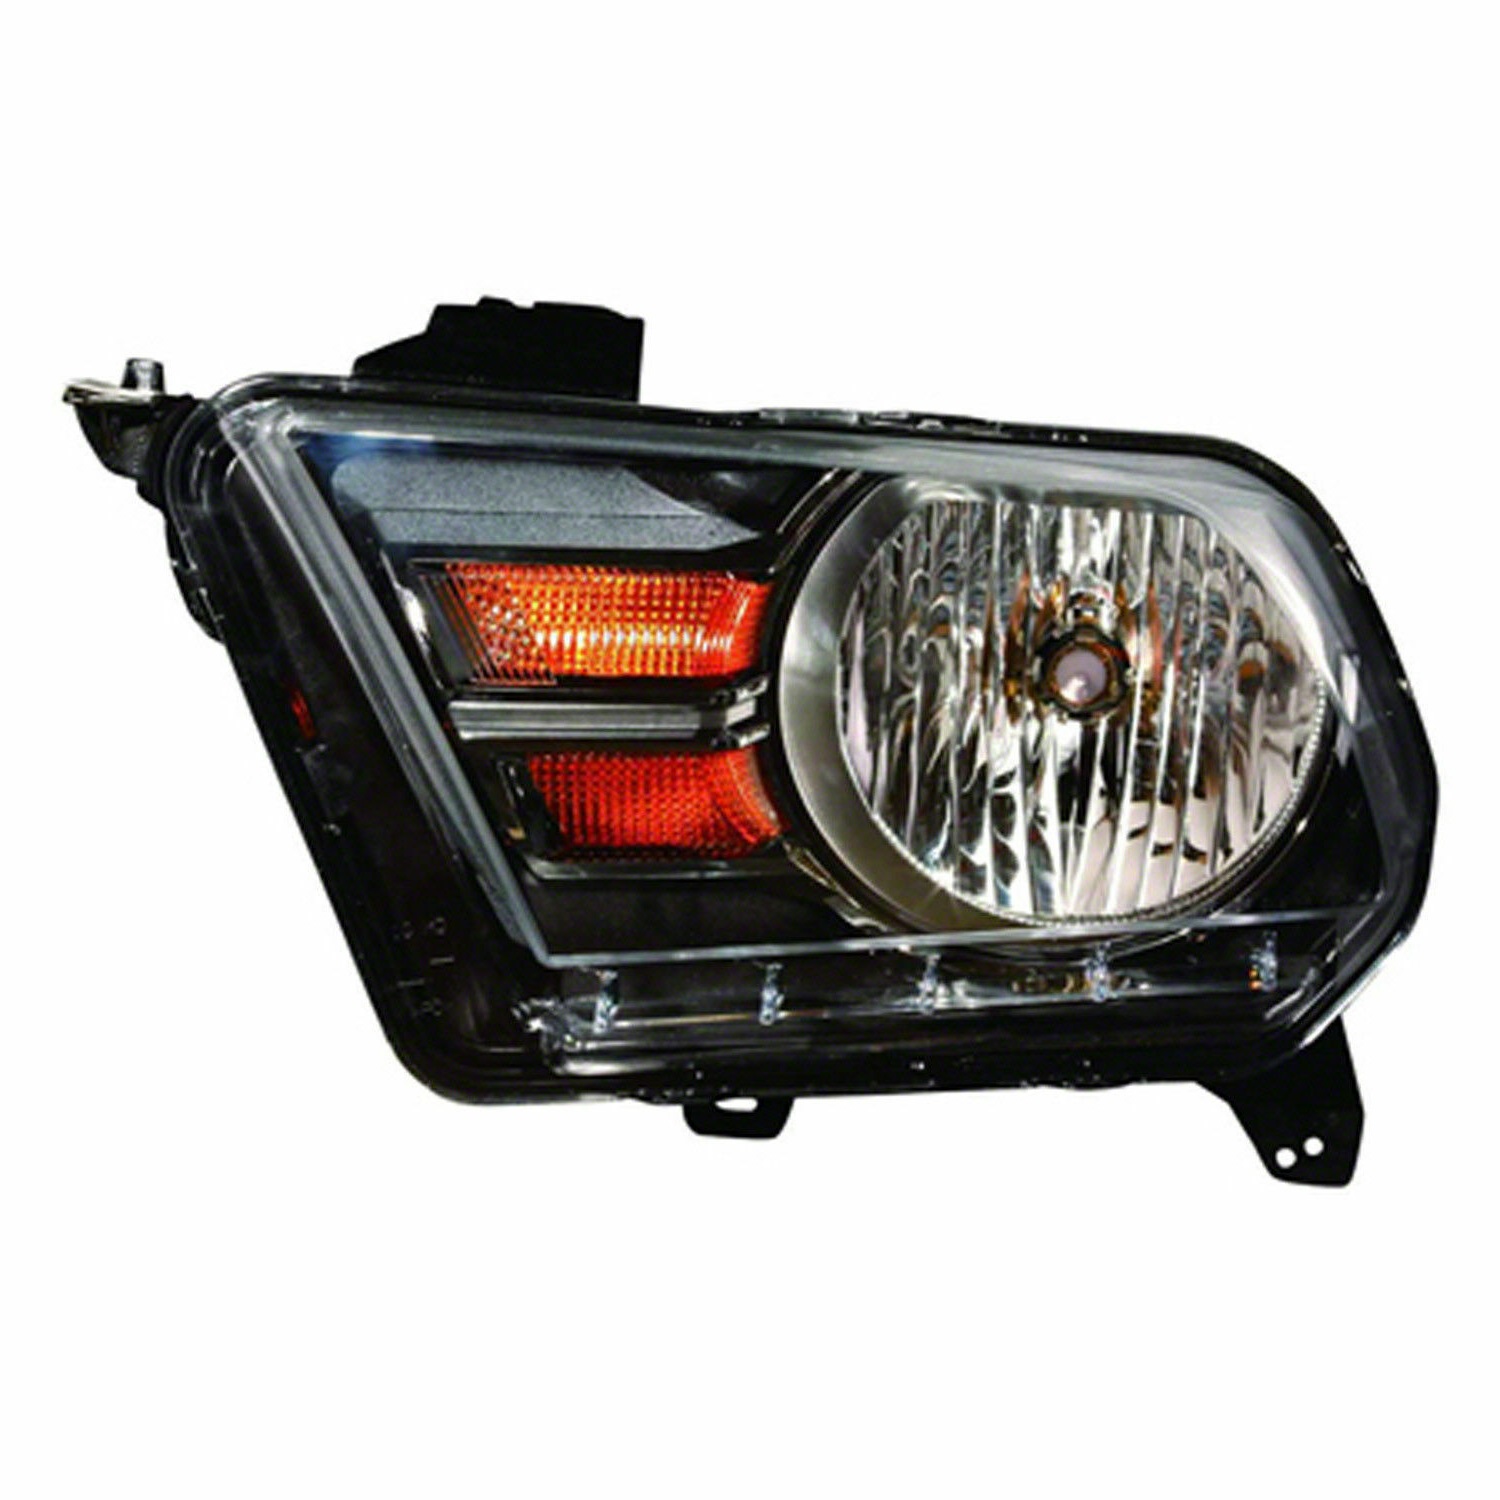 Headlight Assembly for Ford Mustang 2010 2011 2012 2013 2014 